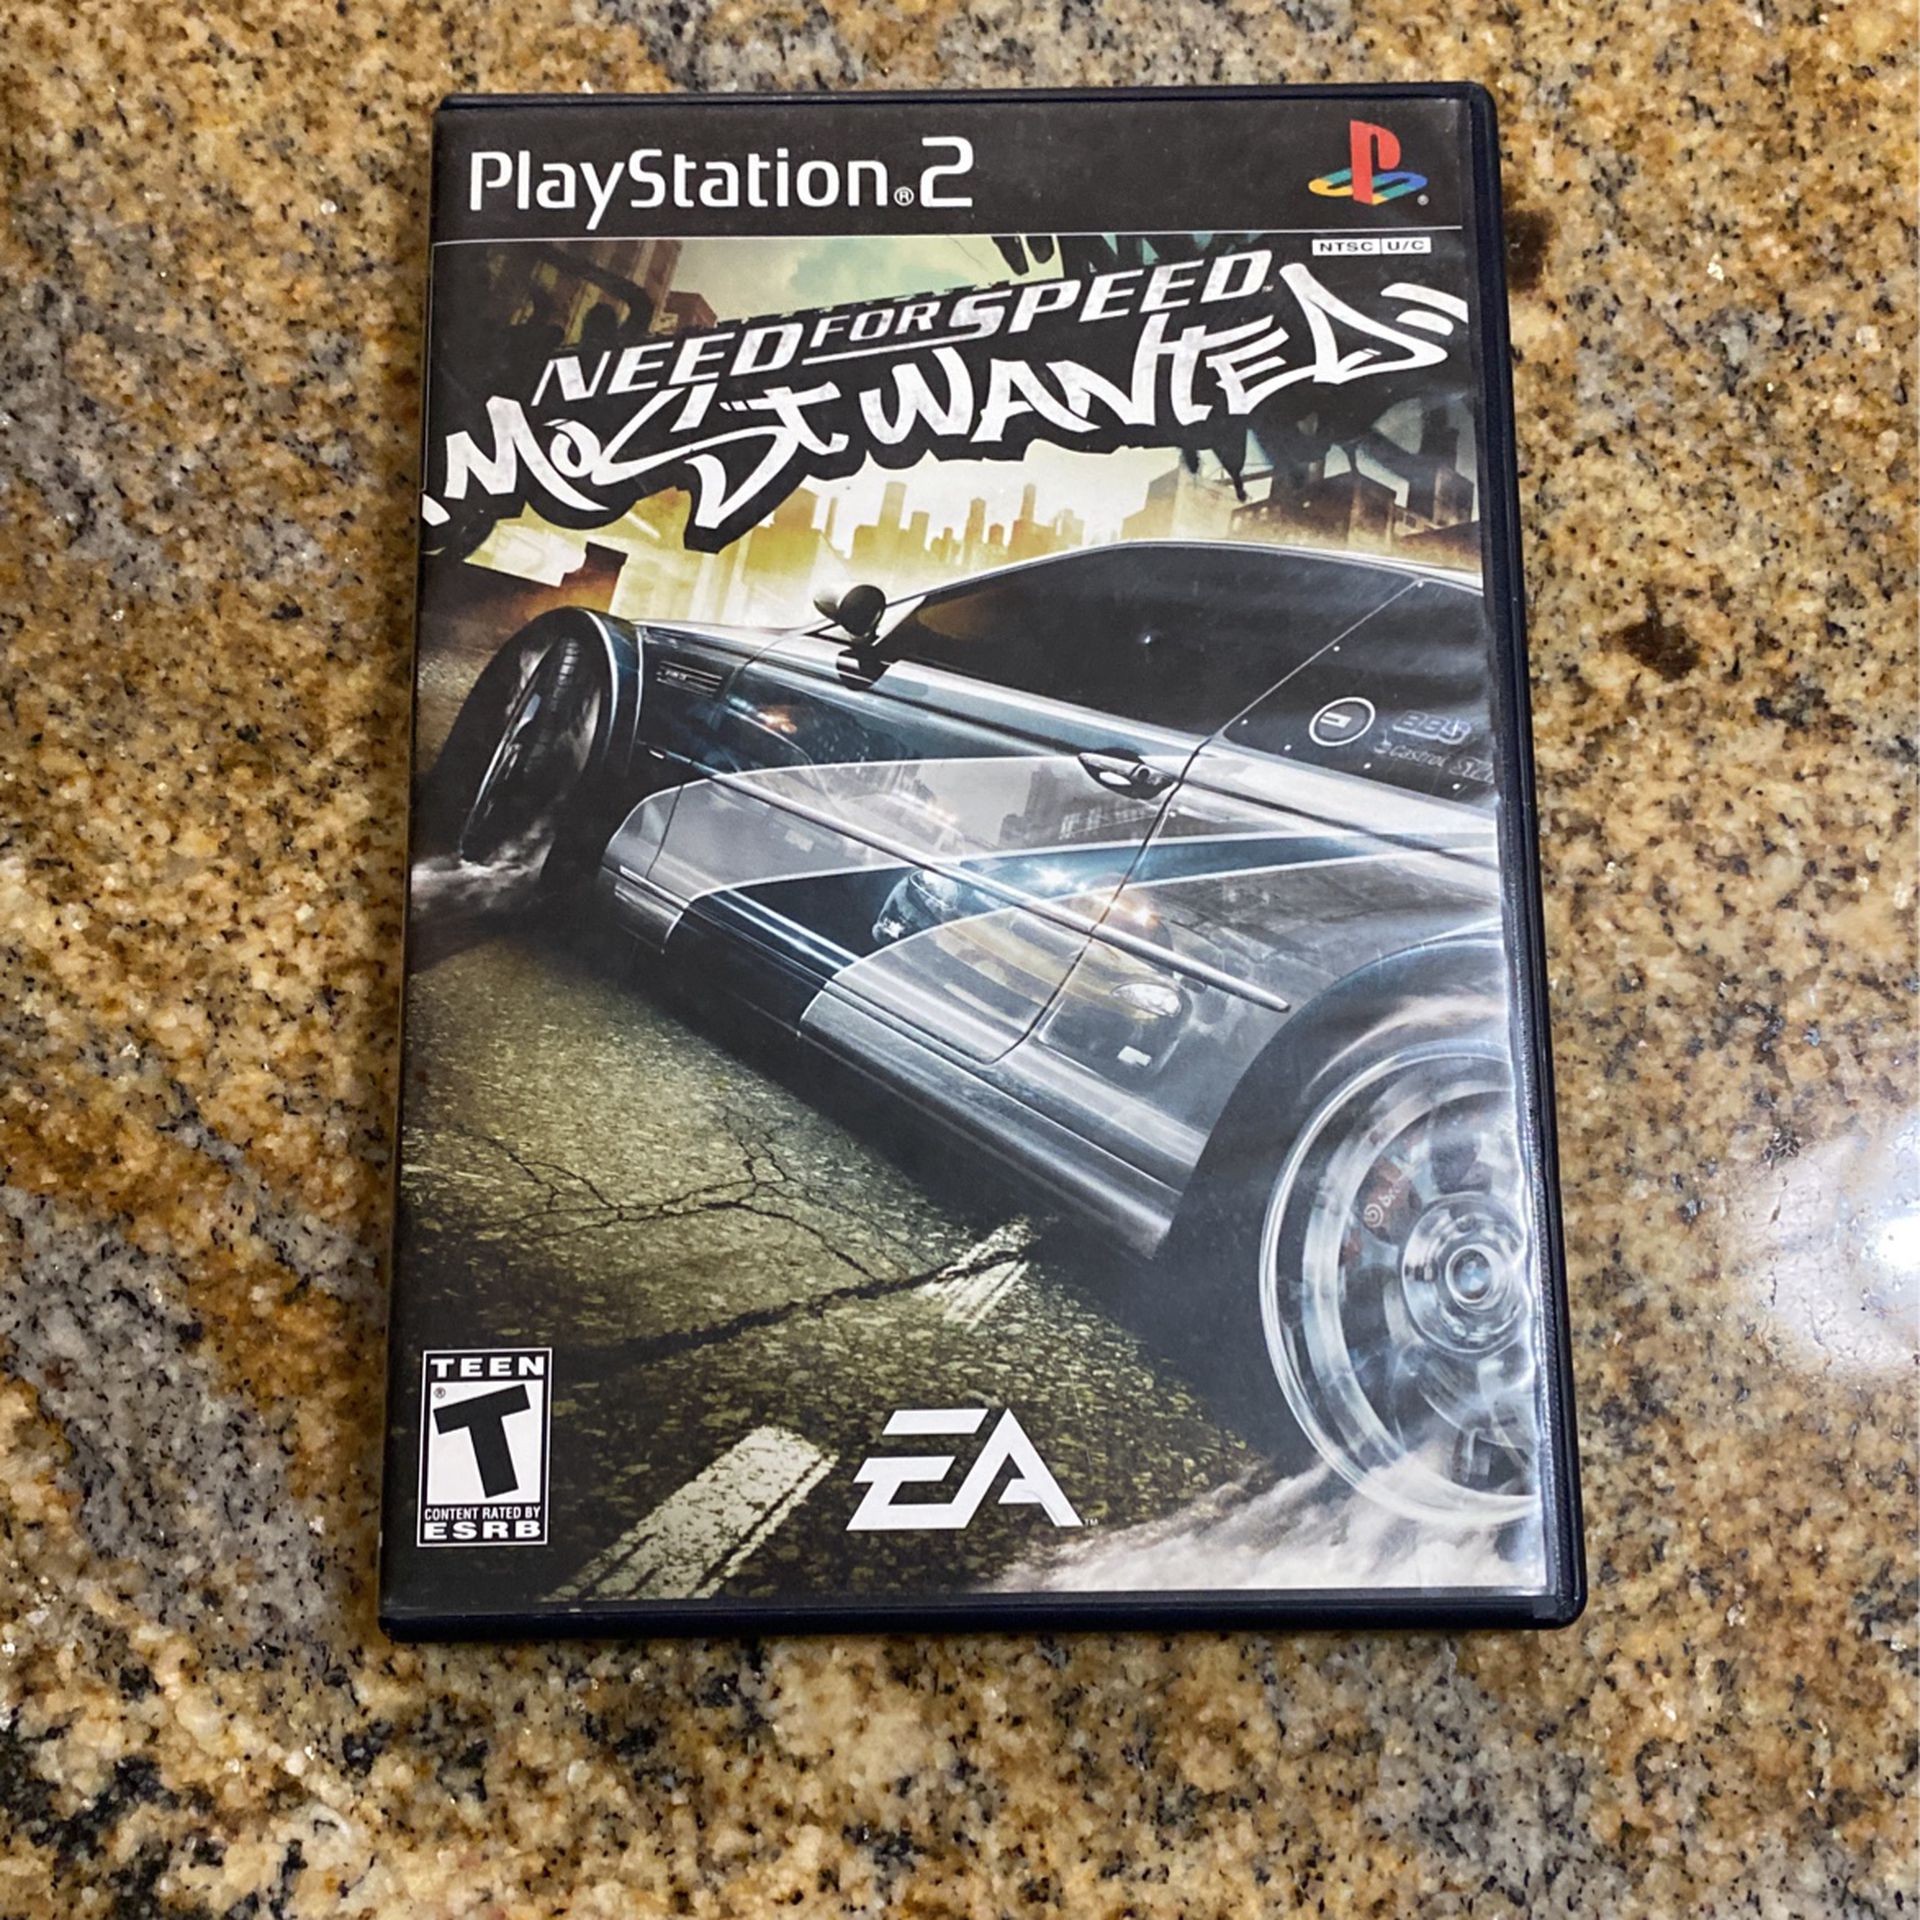 Need for Speed: Most Wanted PS2 2005 Complete Manual Black Label PlayStation